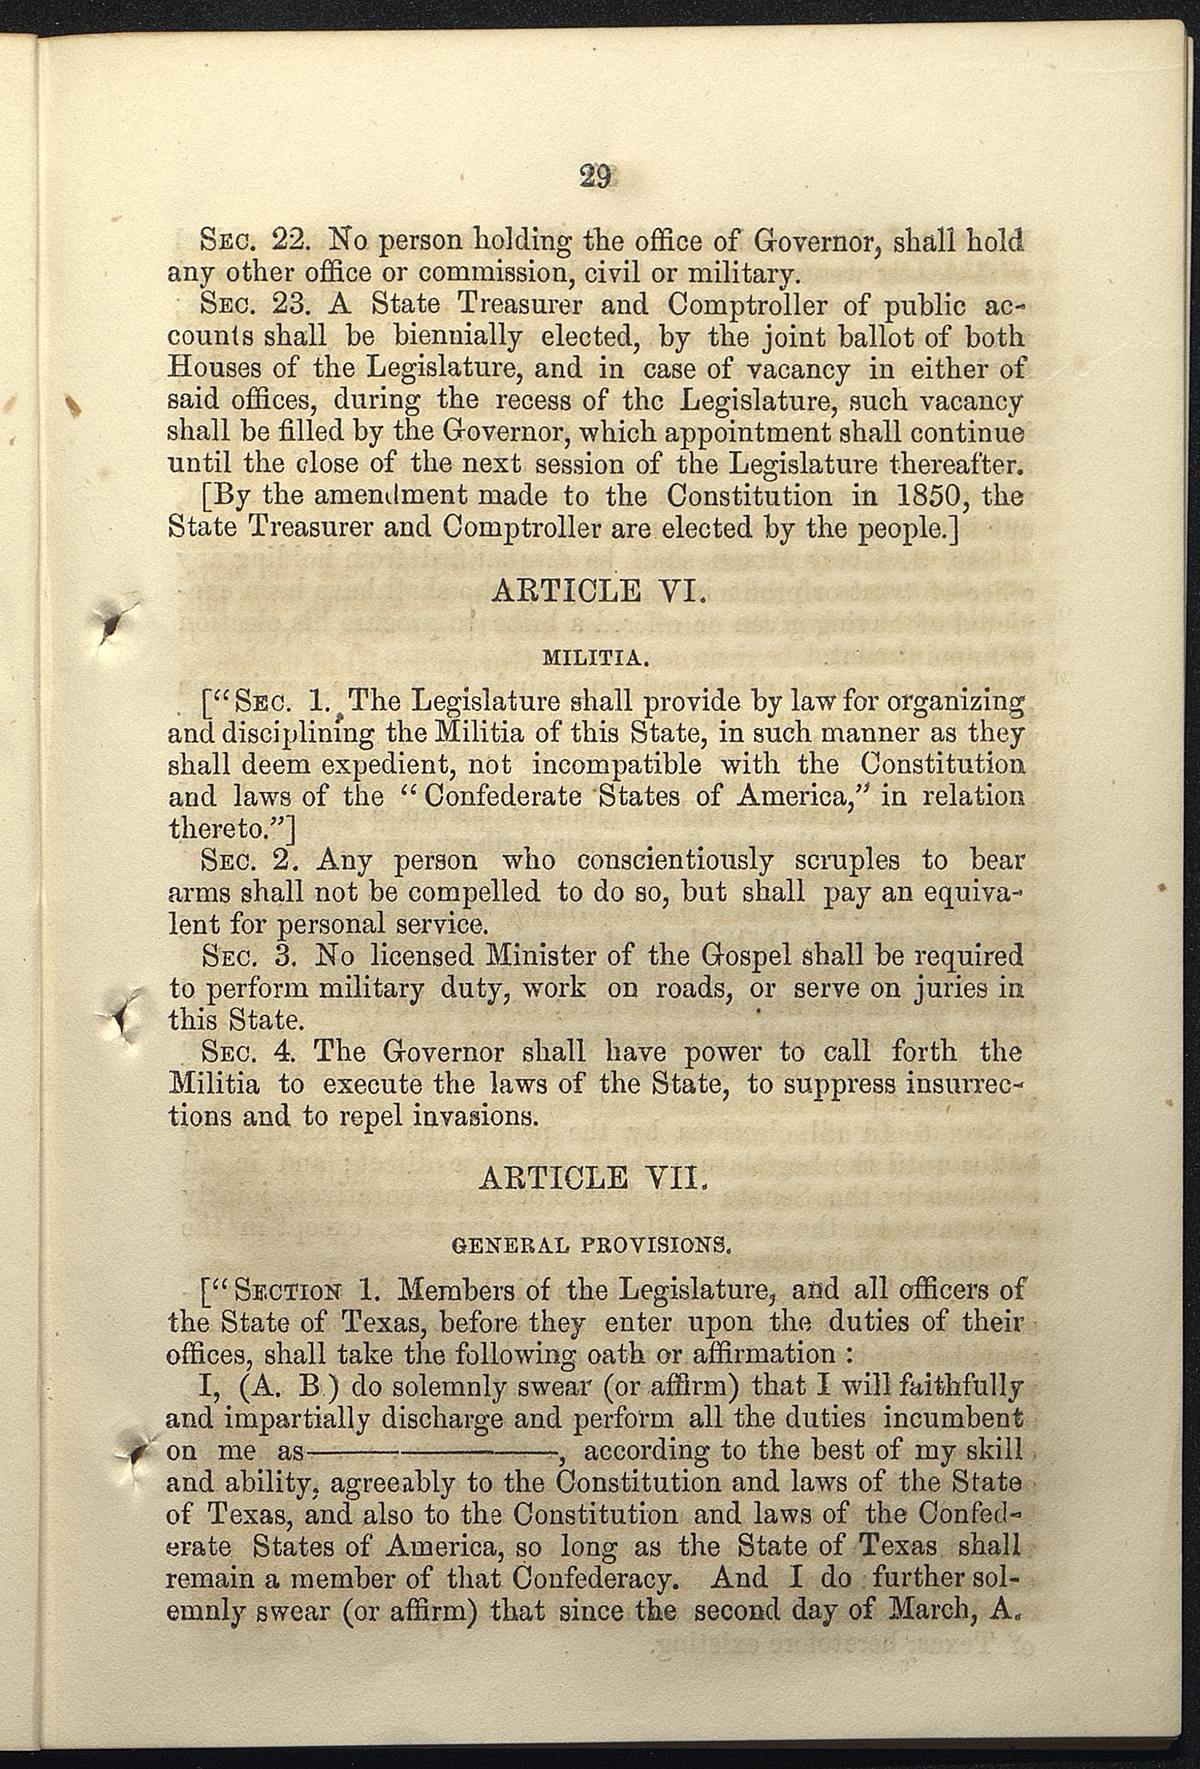 Article VII, Section 1